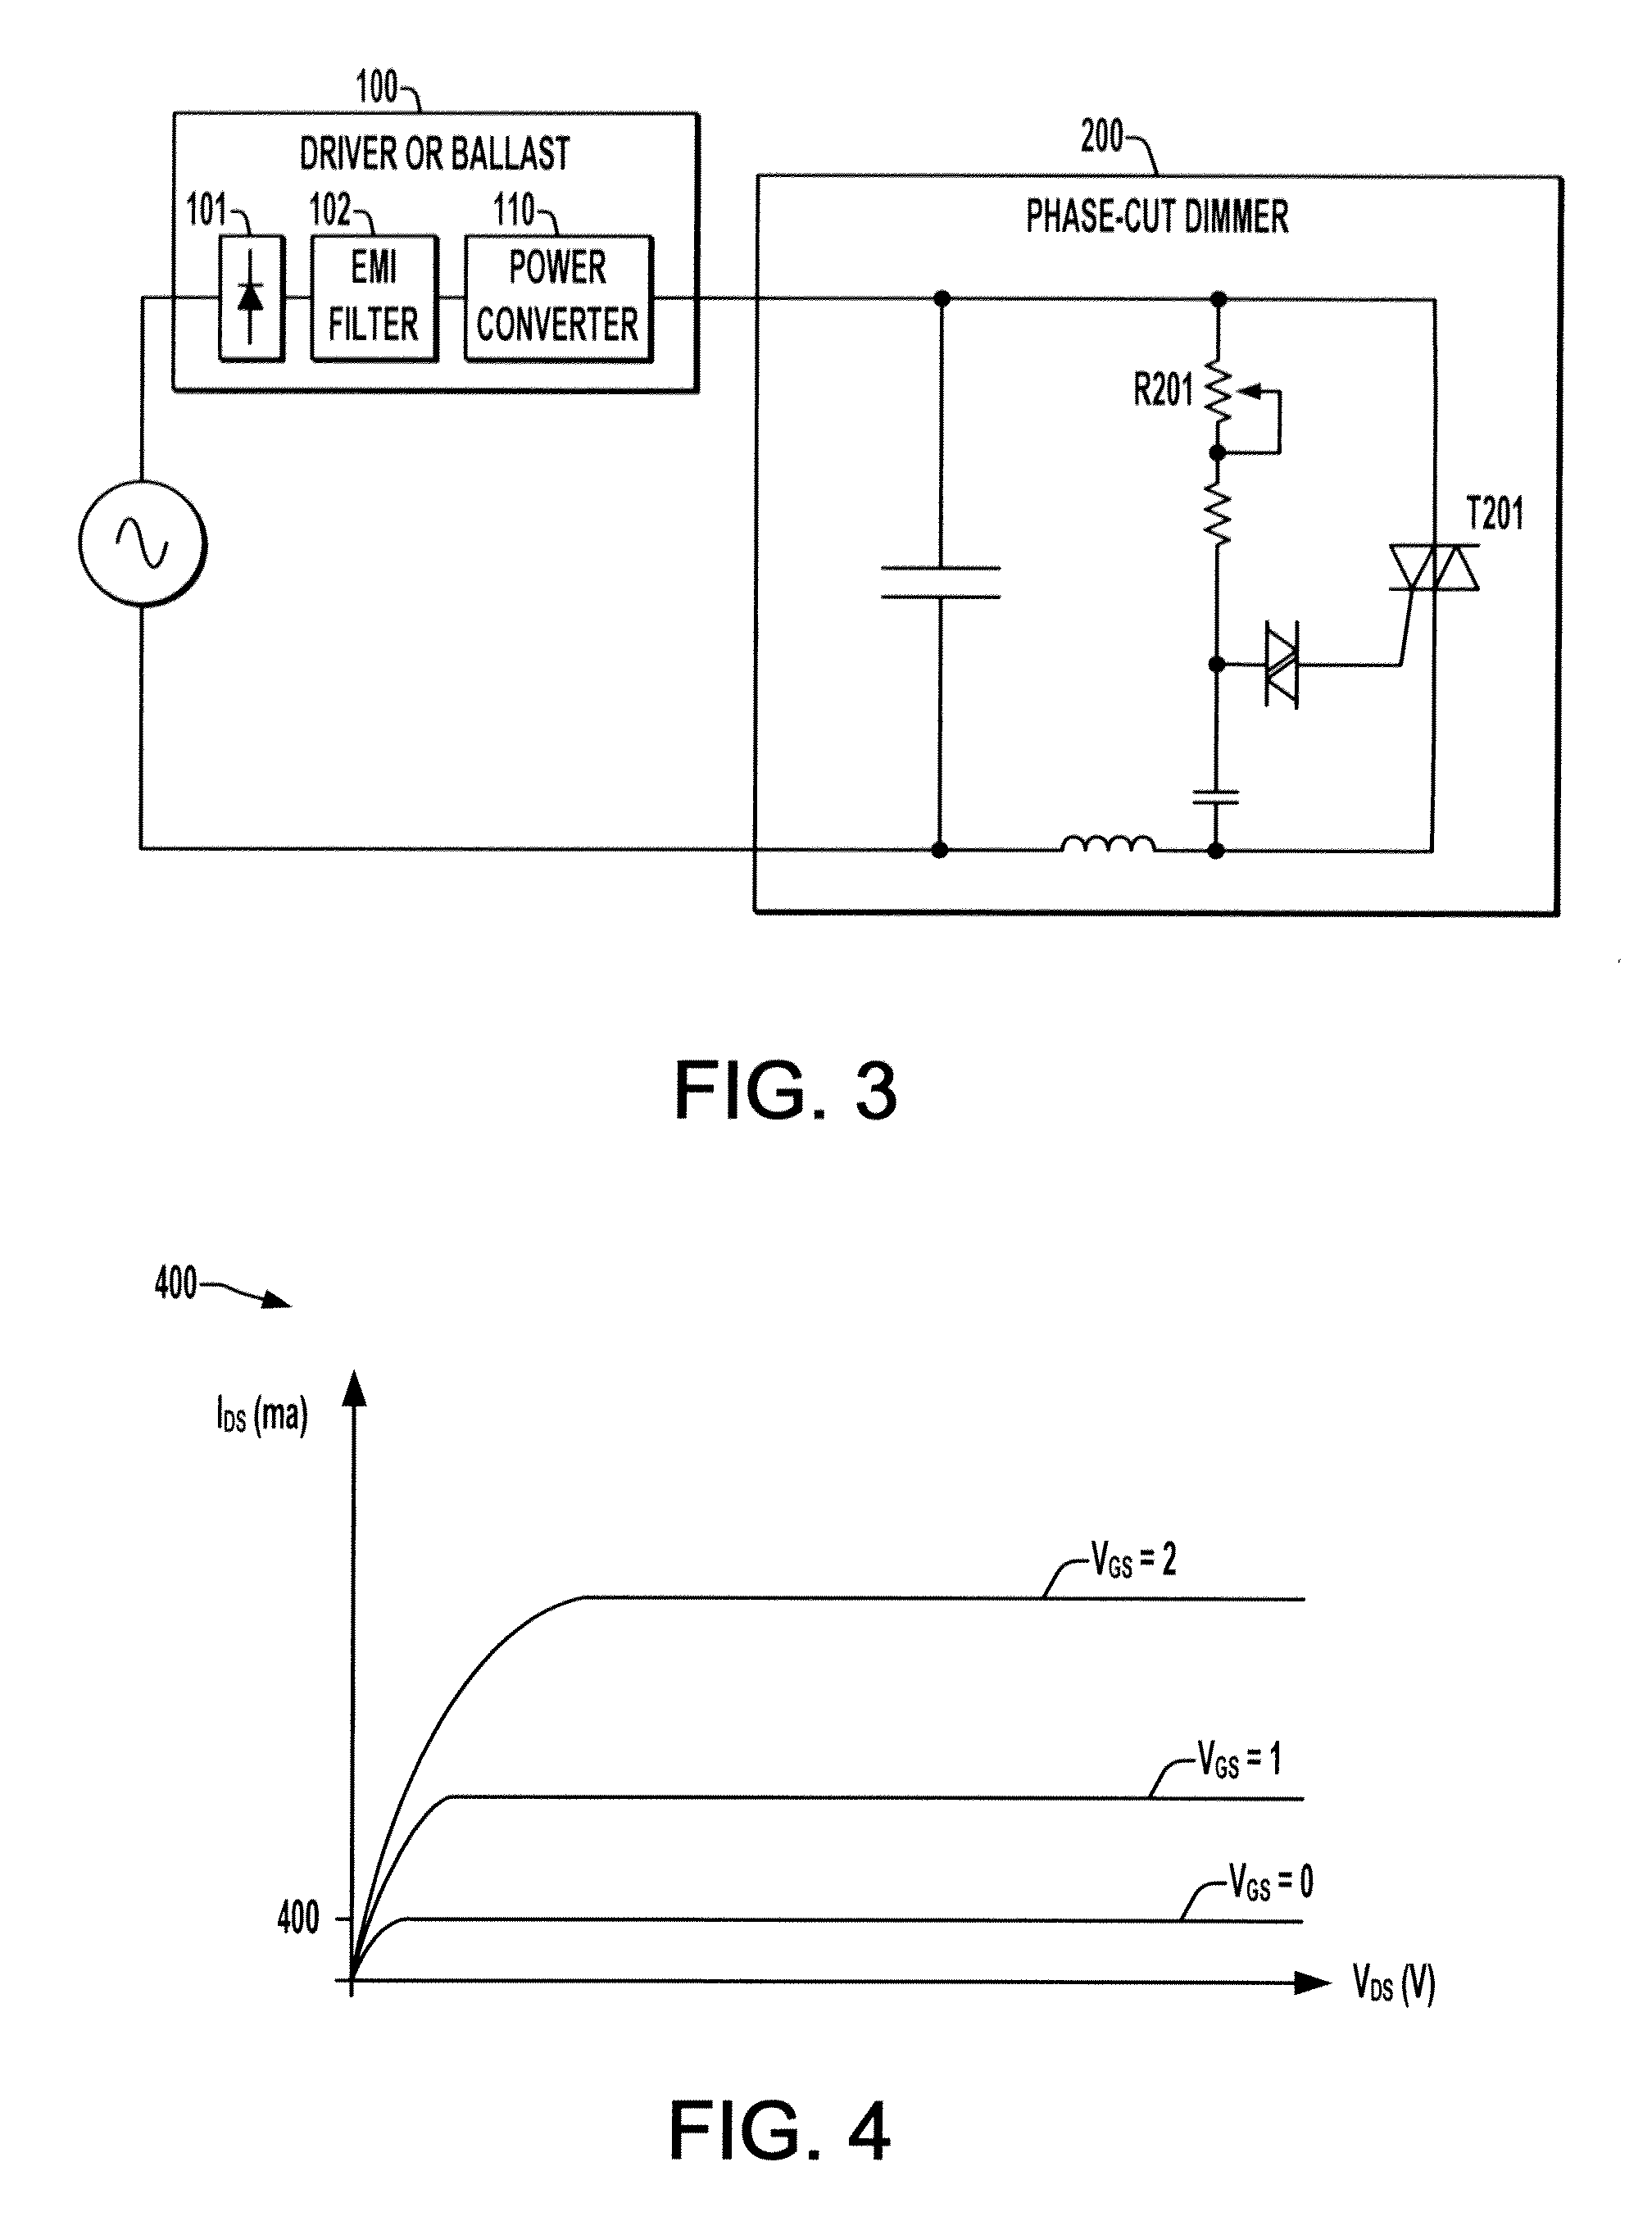 Lighting power circuit with peak current limiter for EMI filter